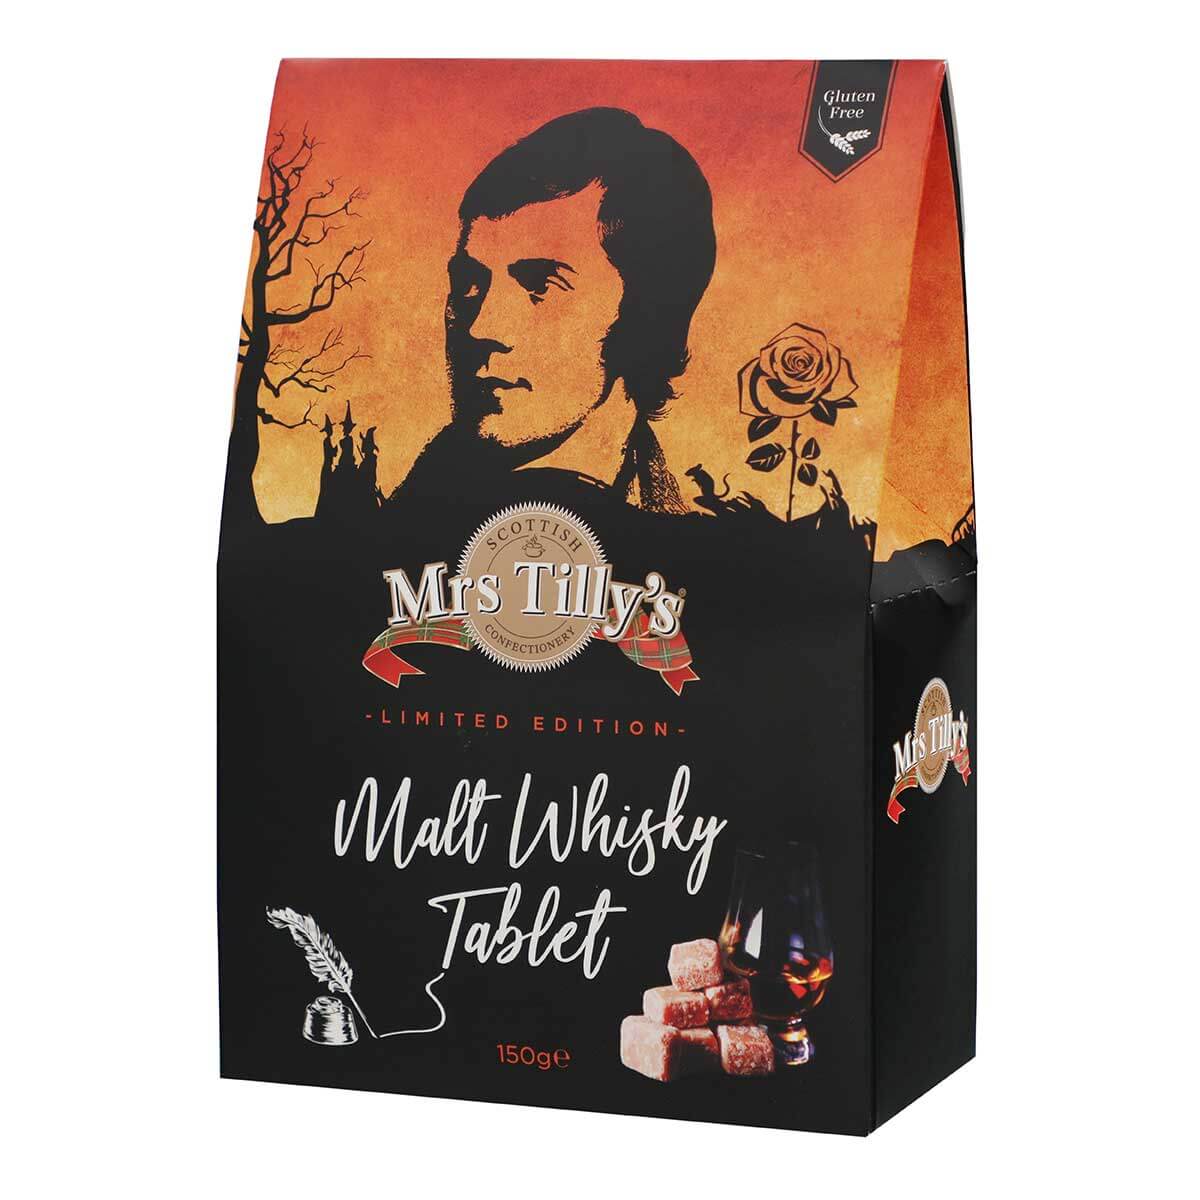 Malt Whisky Tablet Gift Box Limited Edition 150g